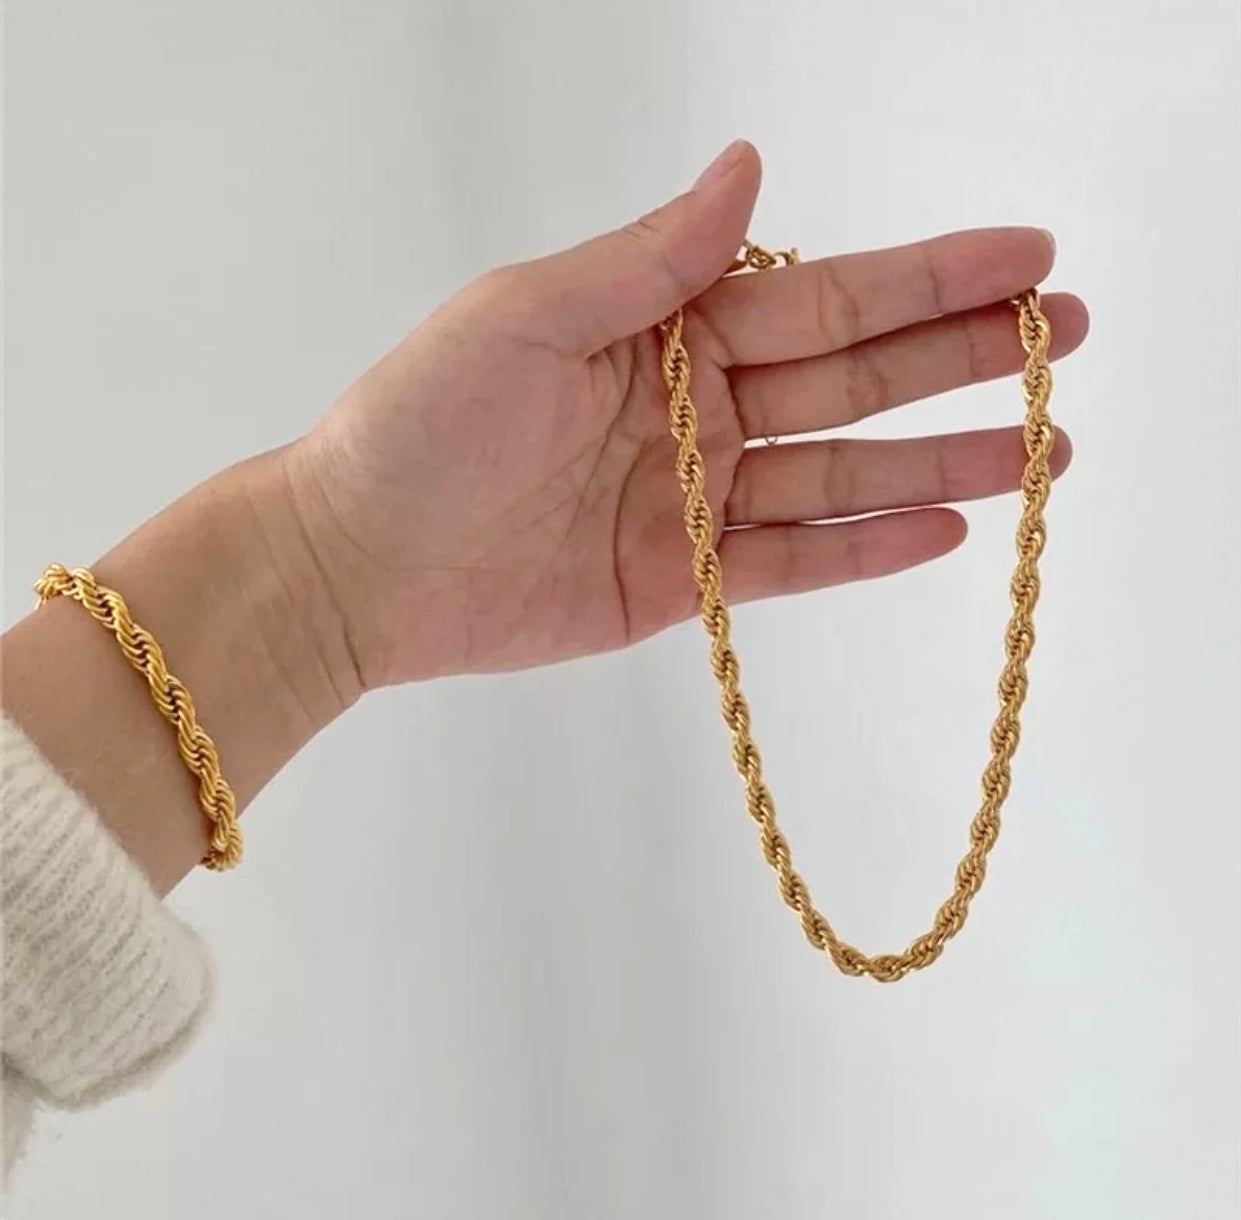 18k rope chain necklace and bracelet set